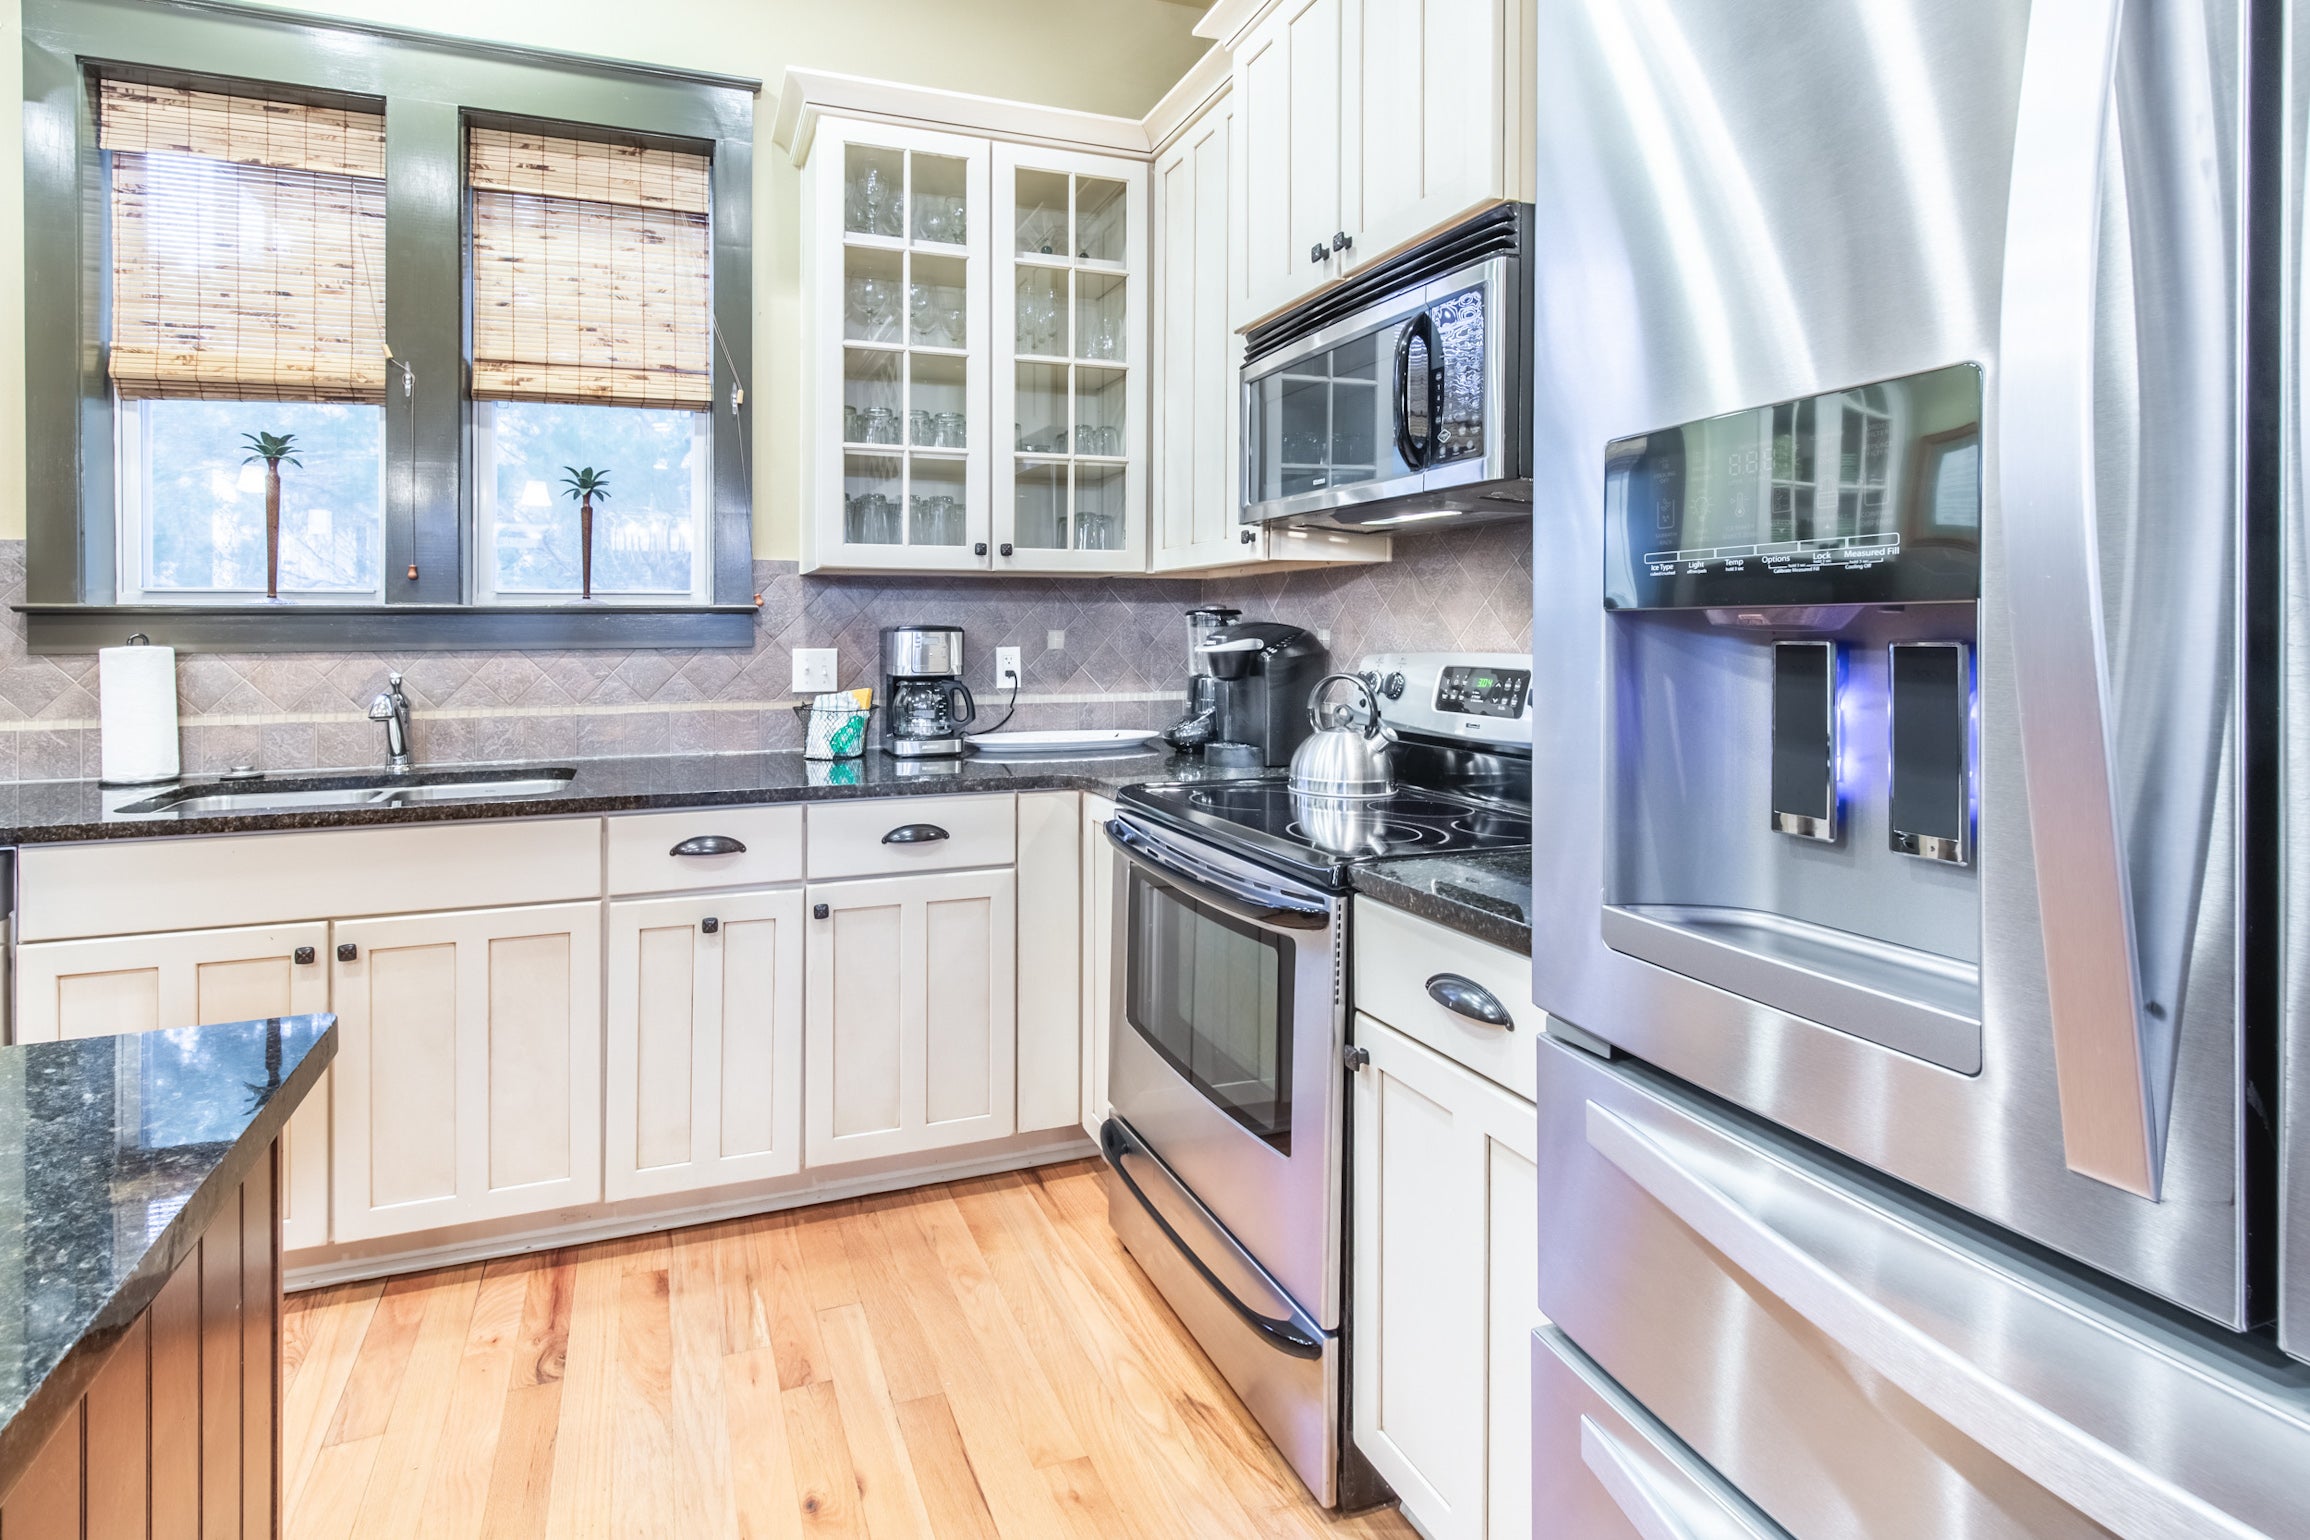 Stainless Appliances and Granite Countertops